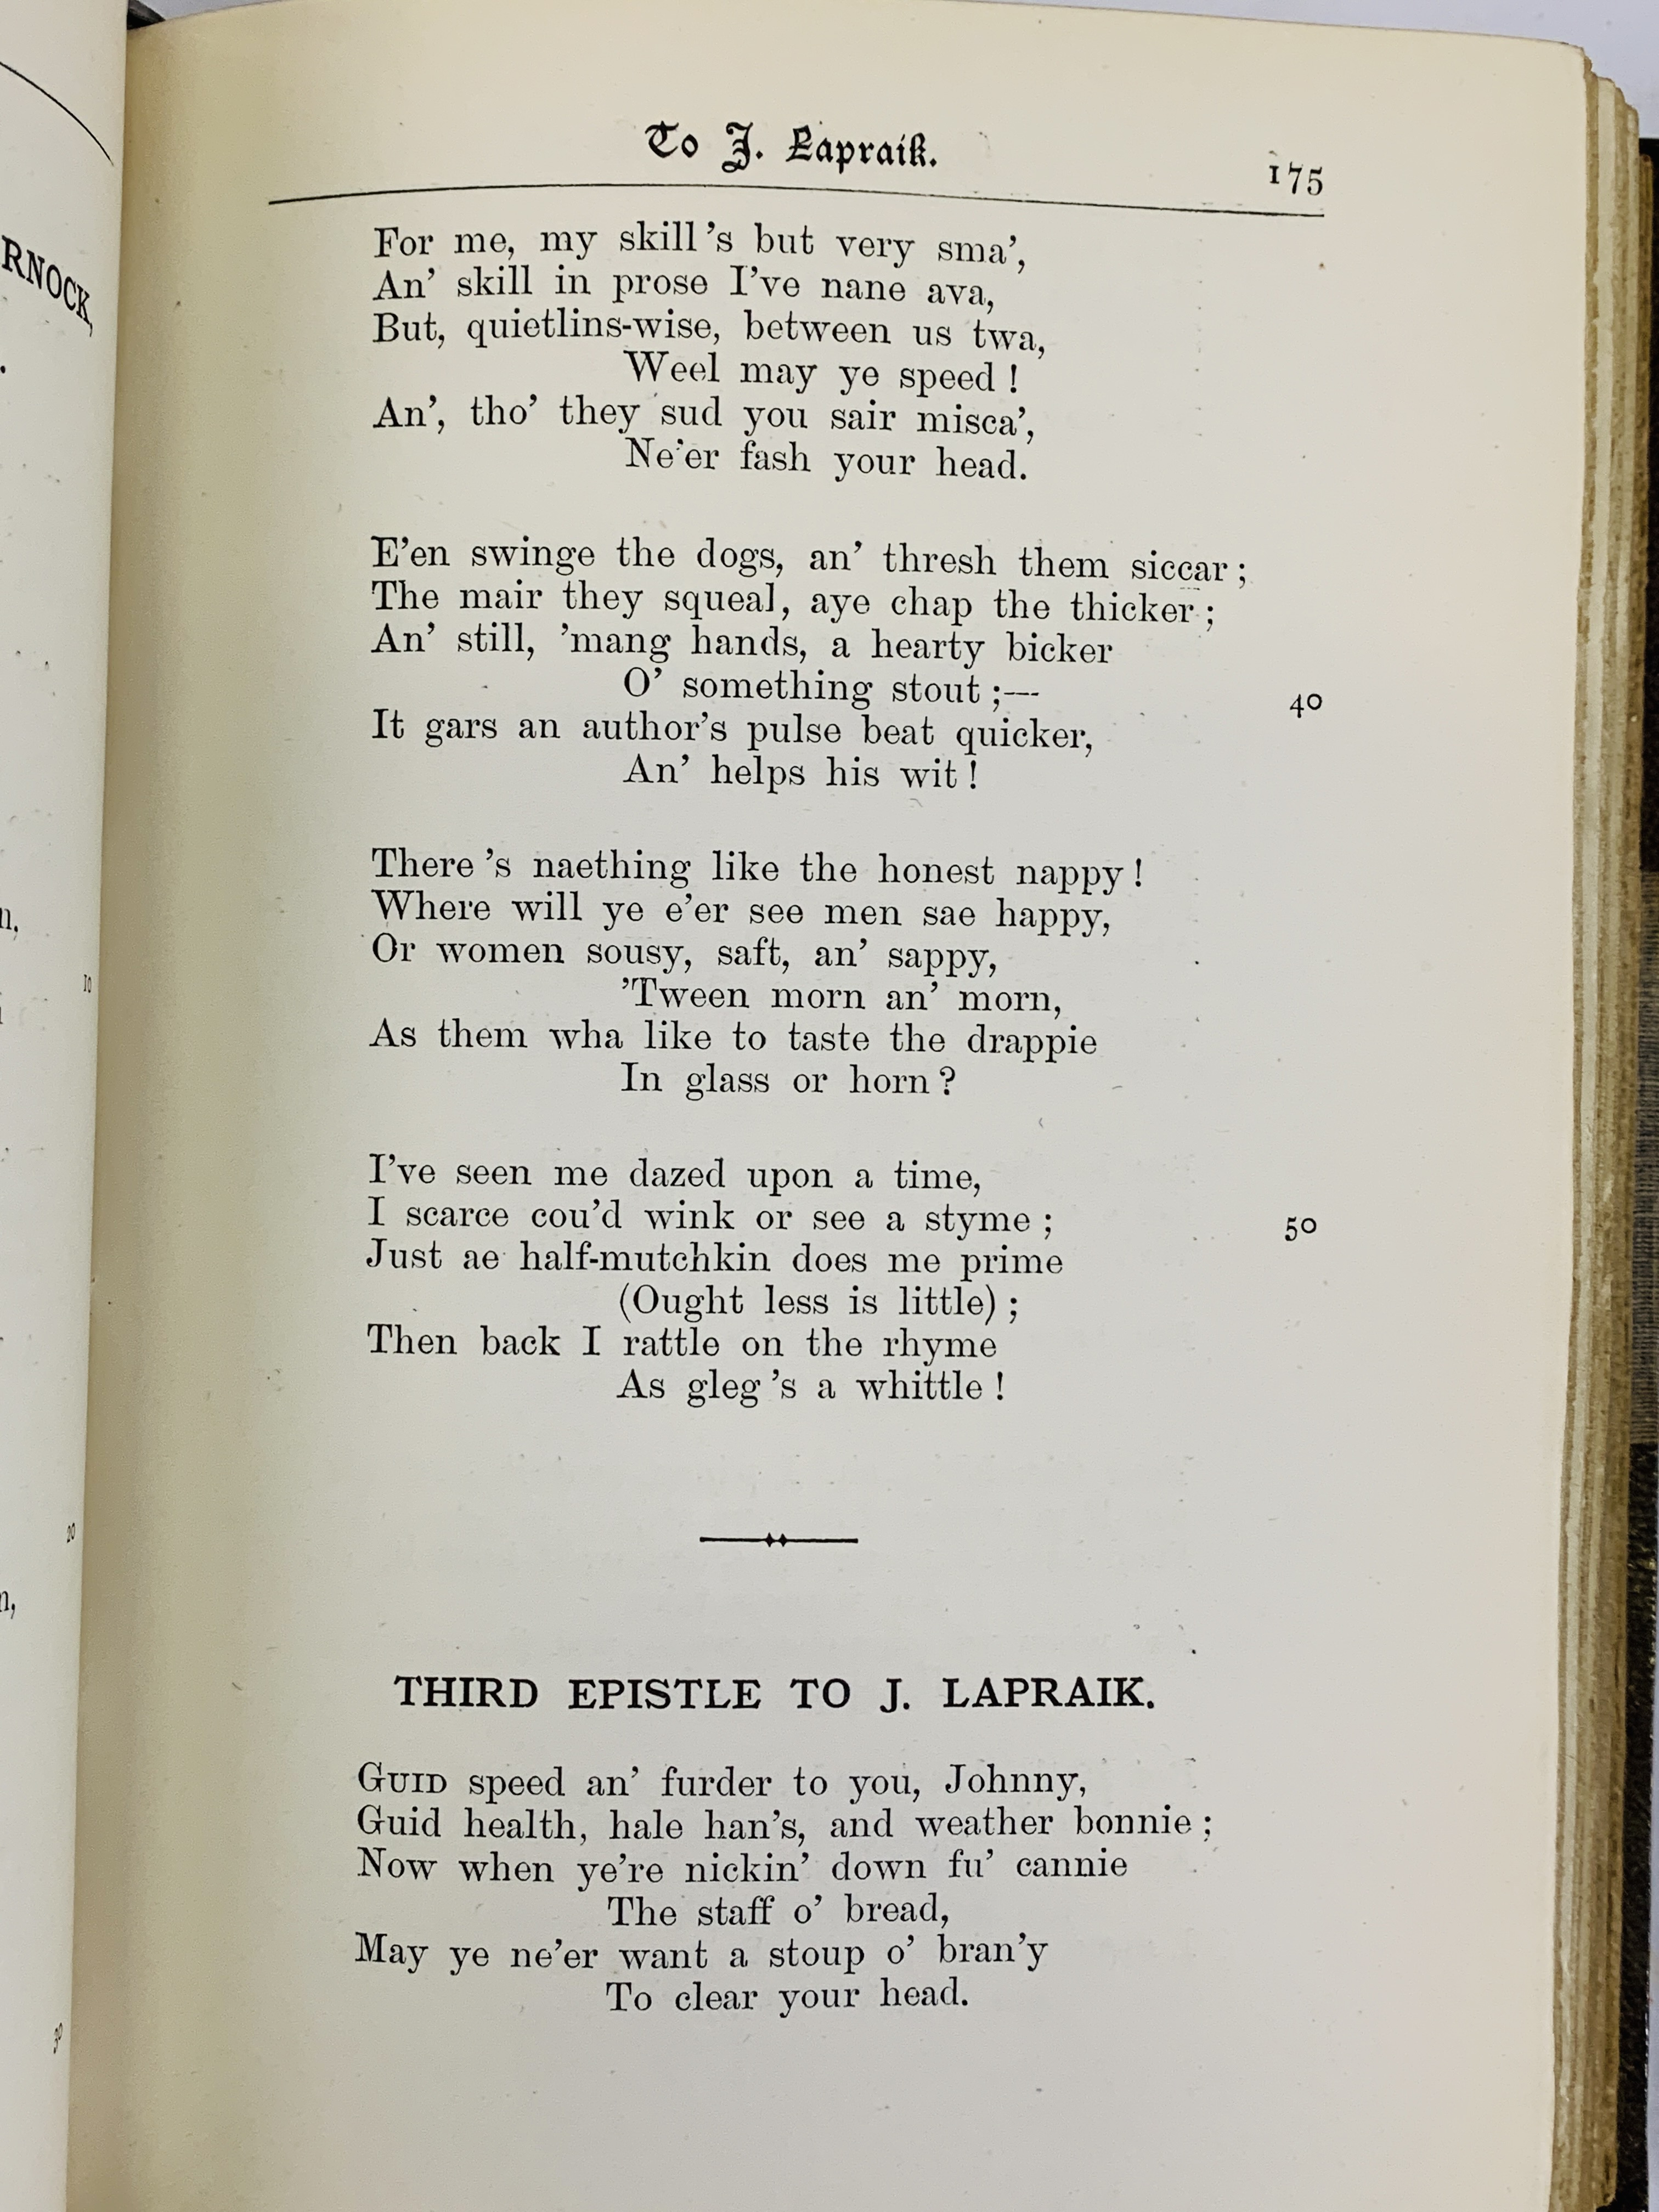 Poems of Burns - Image 3 of 3